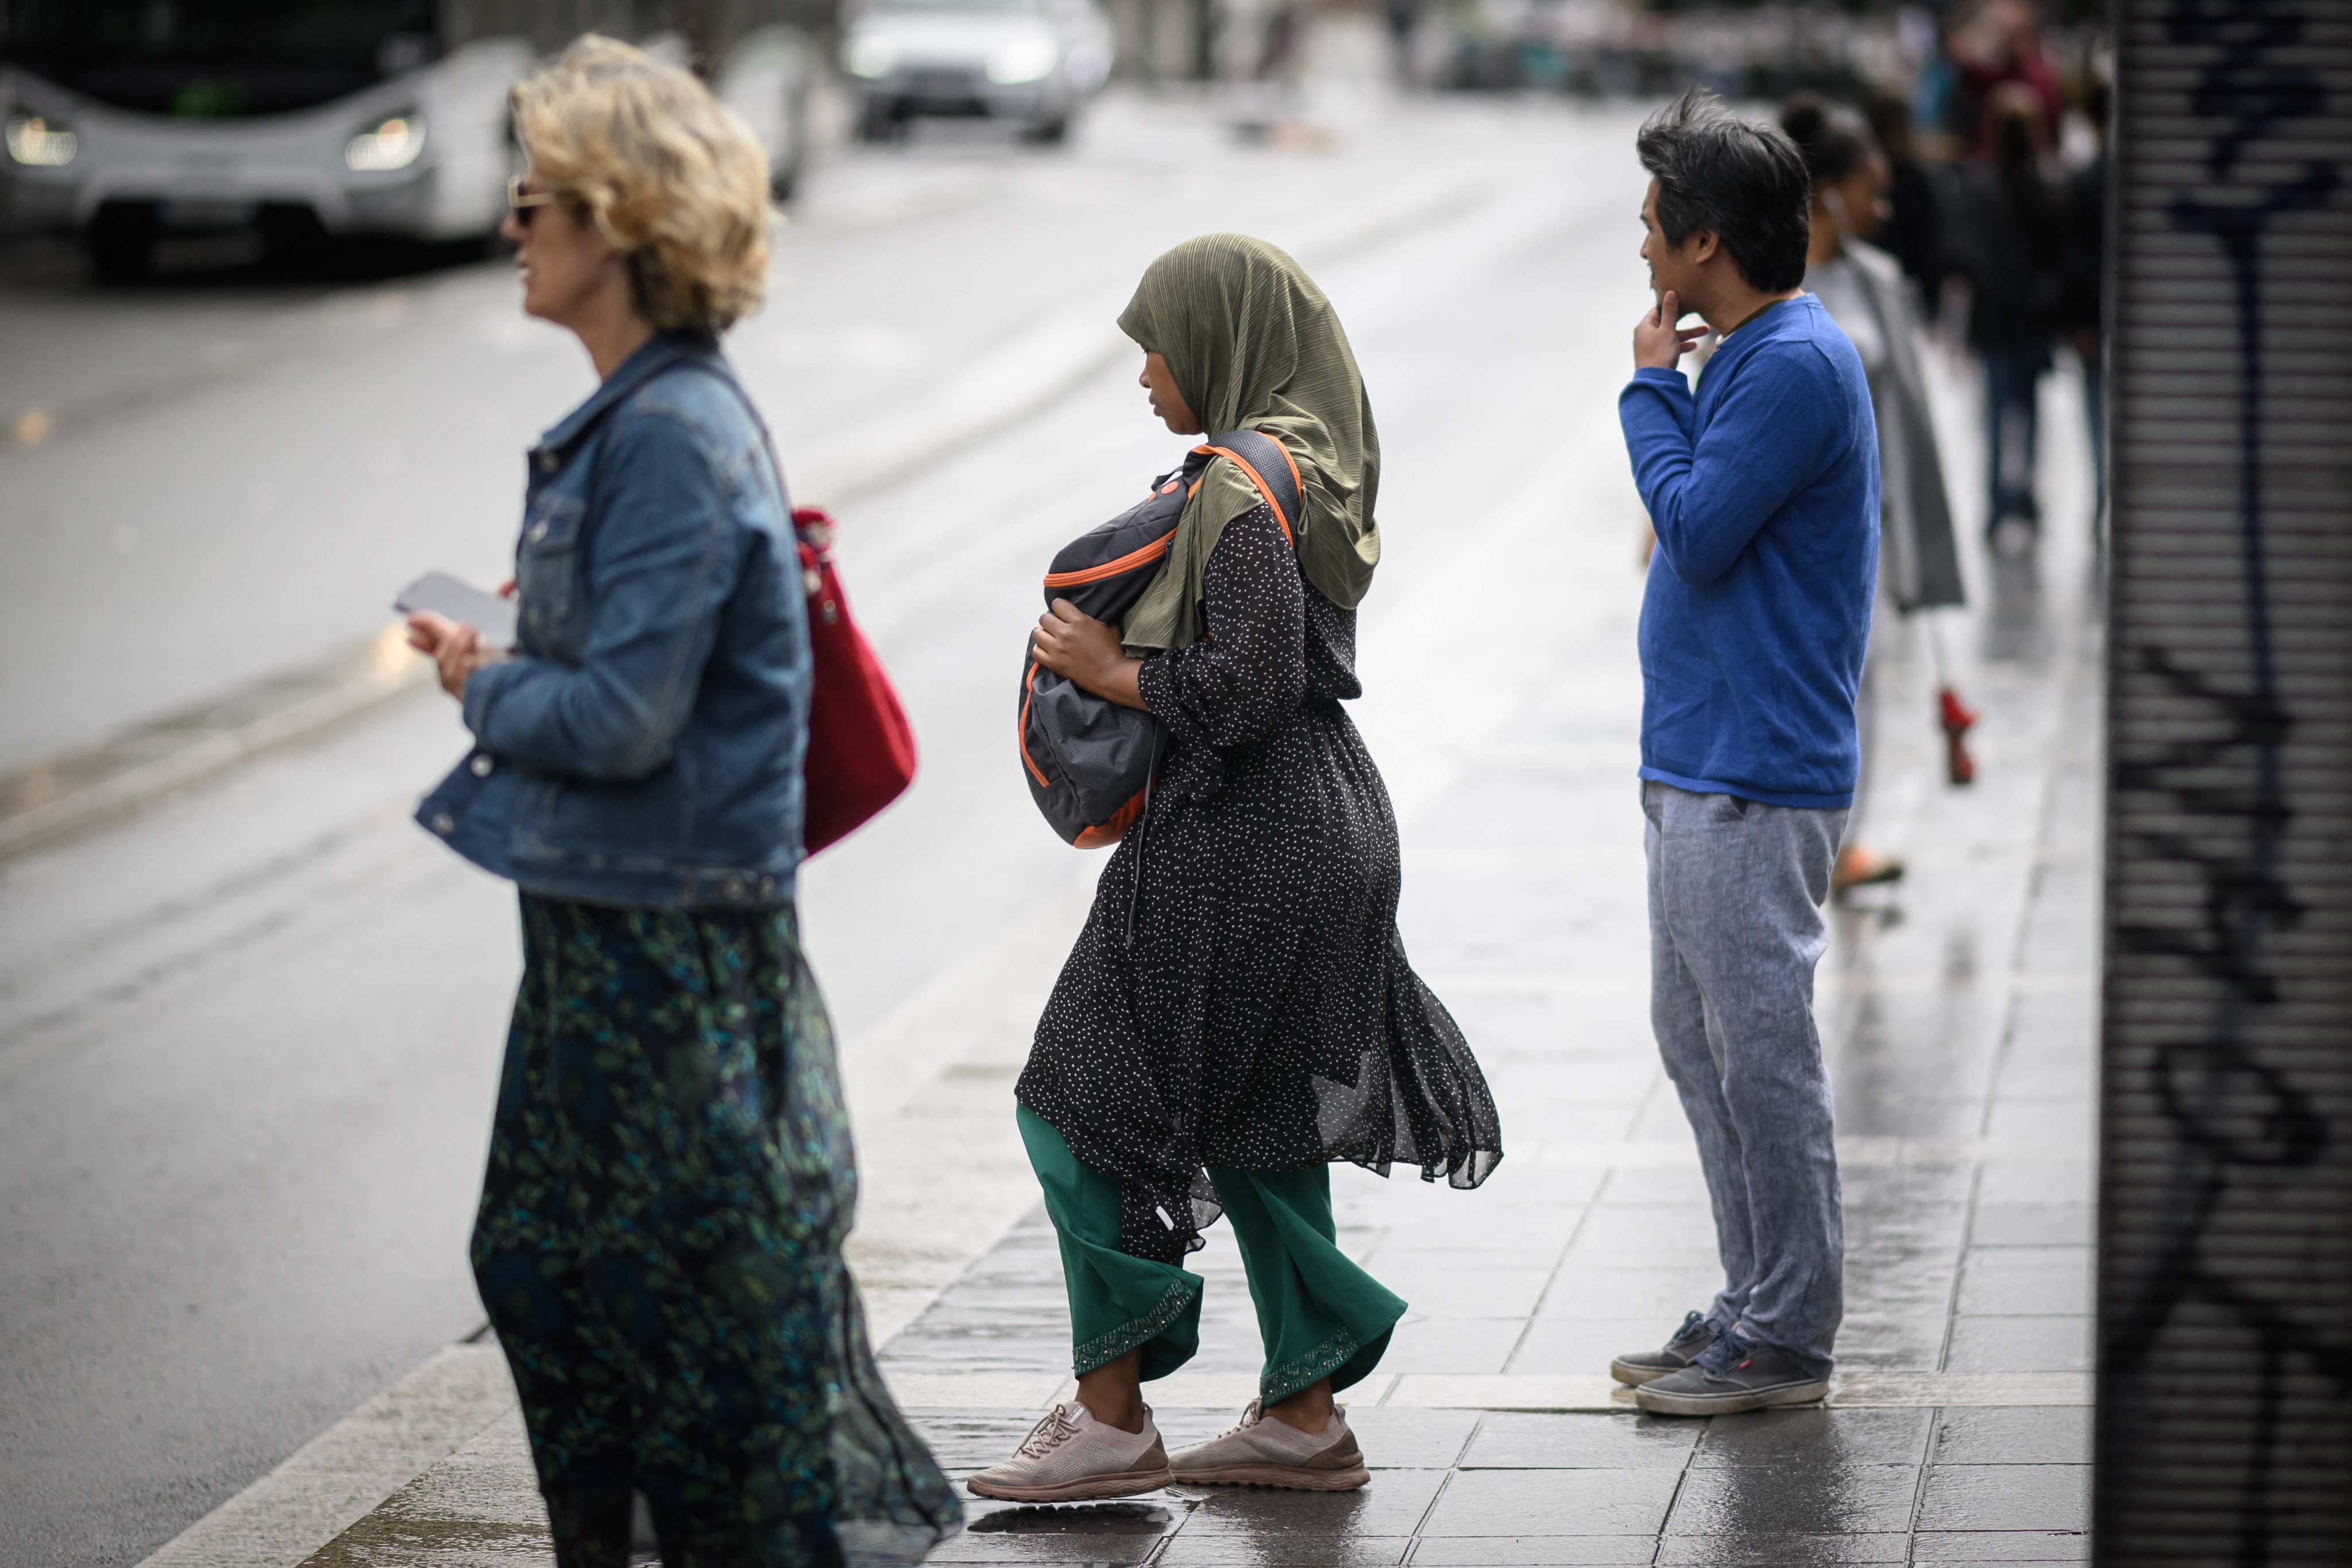 A young woman wears an abaya as she stands on a street in Nantes, France. Photo: AFP